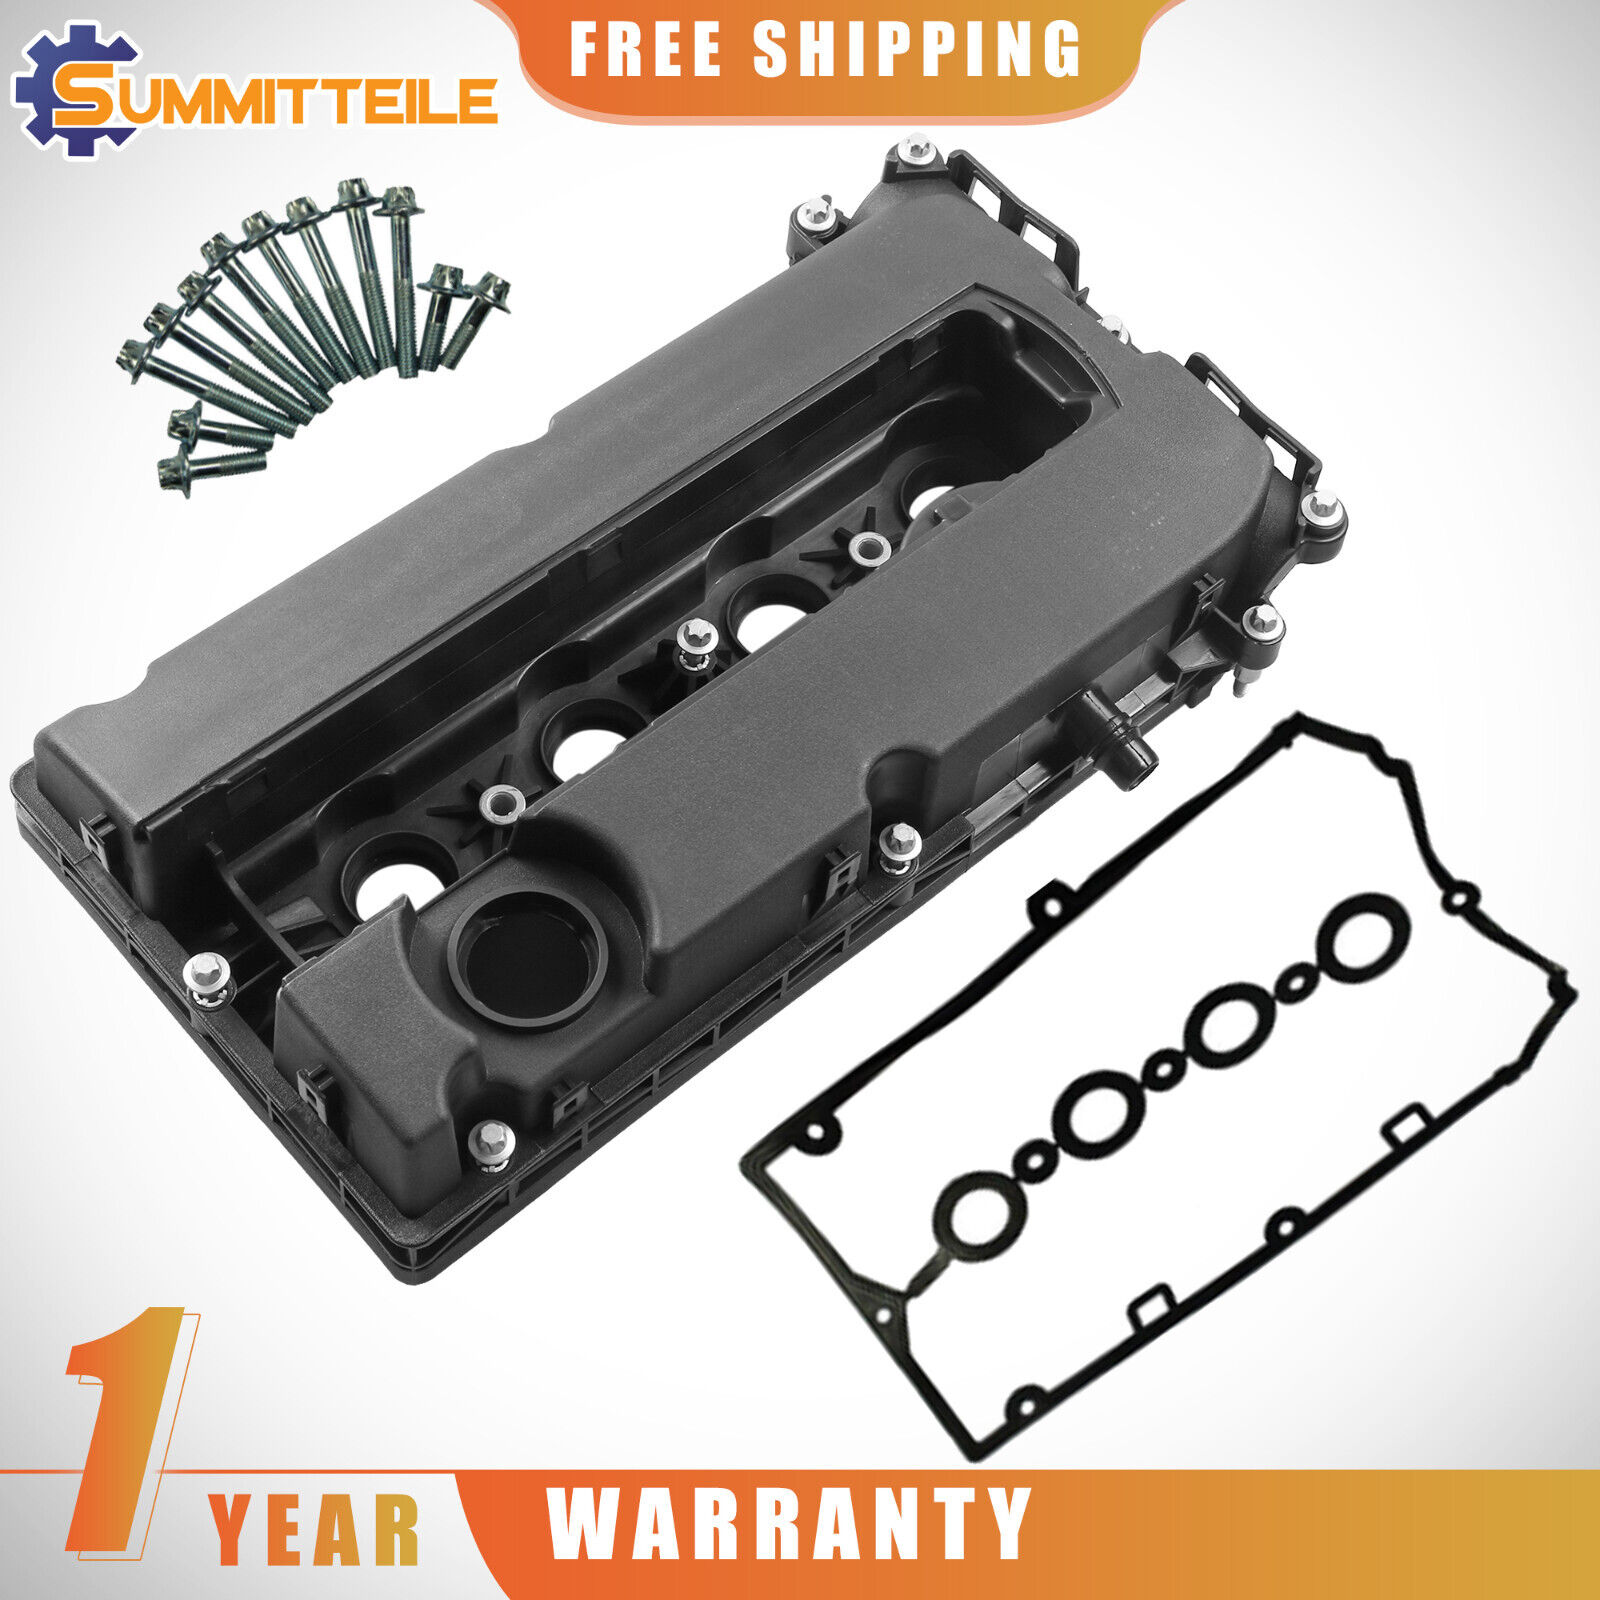 Engine Valve Camshaft Cover W/ Gasket For Chevy Cruze Sonic Aveo Saturn 55558673